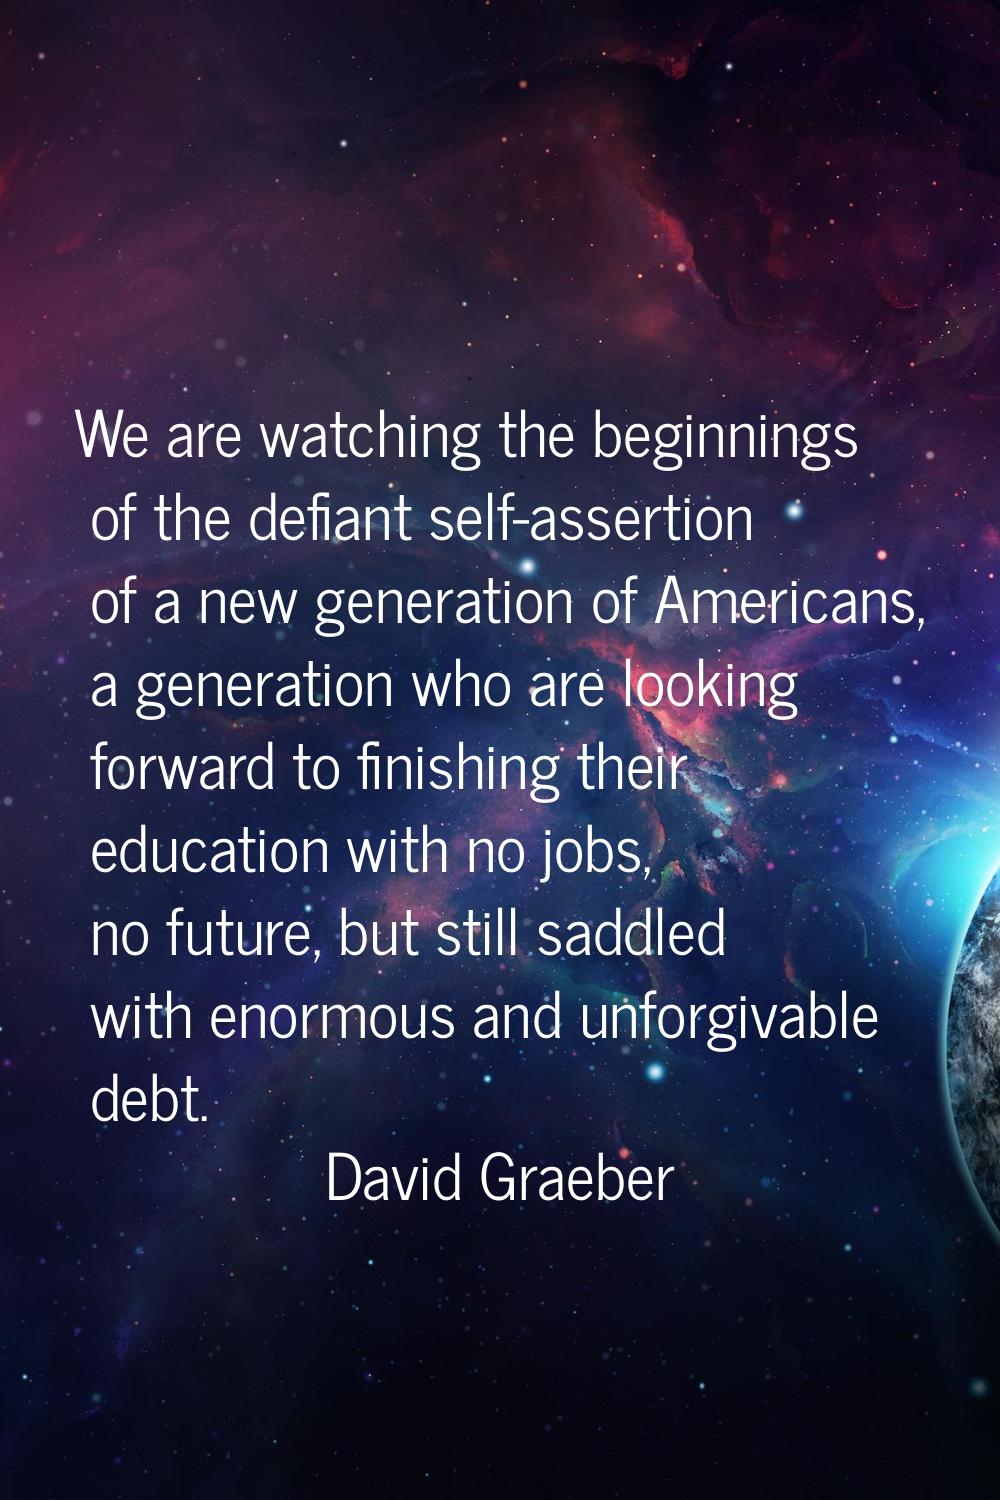 We are watching the beginnings of the defiant self-assertion of a new generation of Americans, a ge